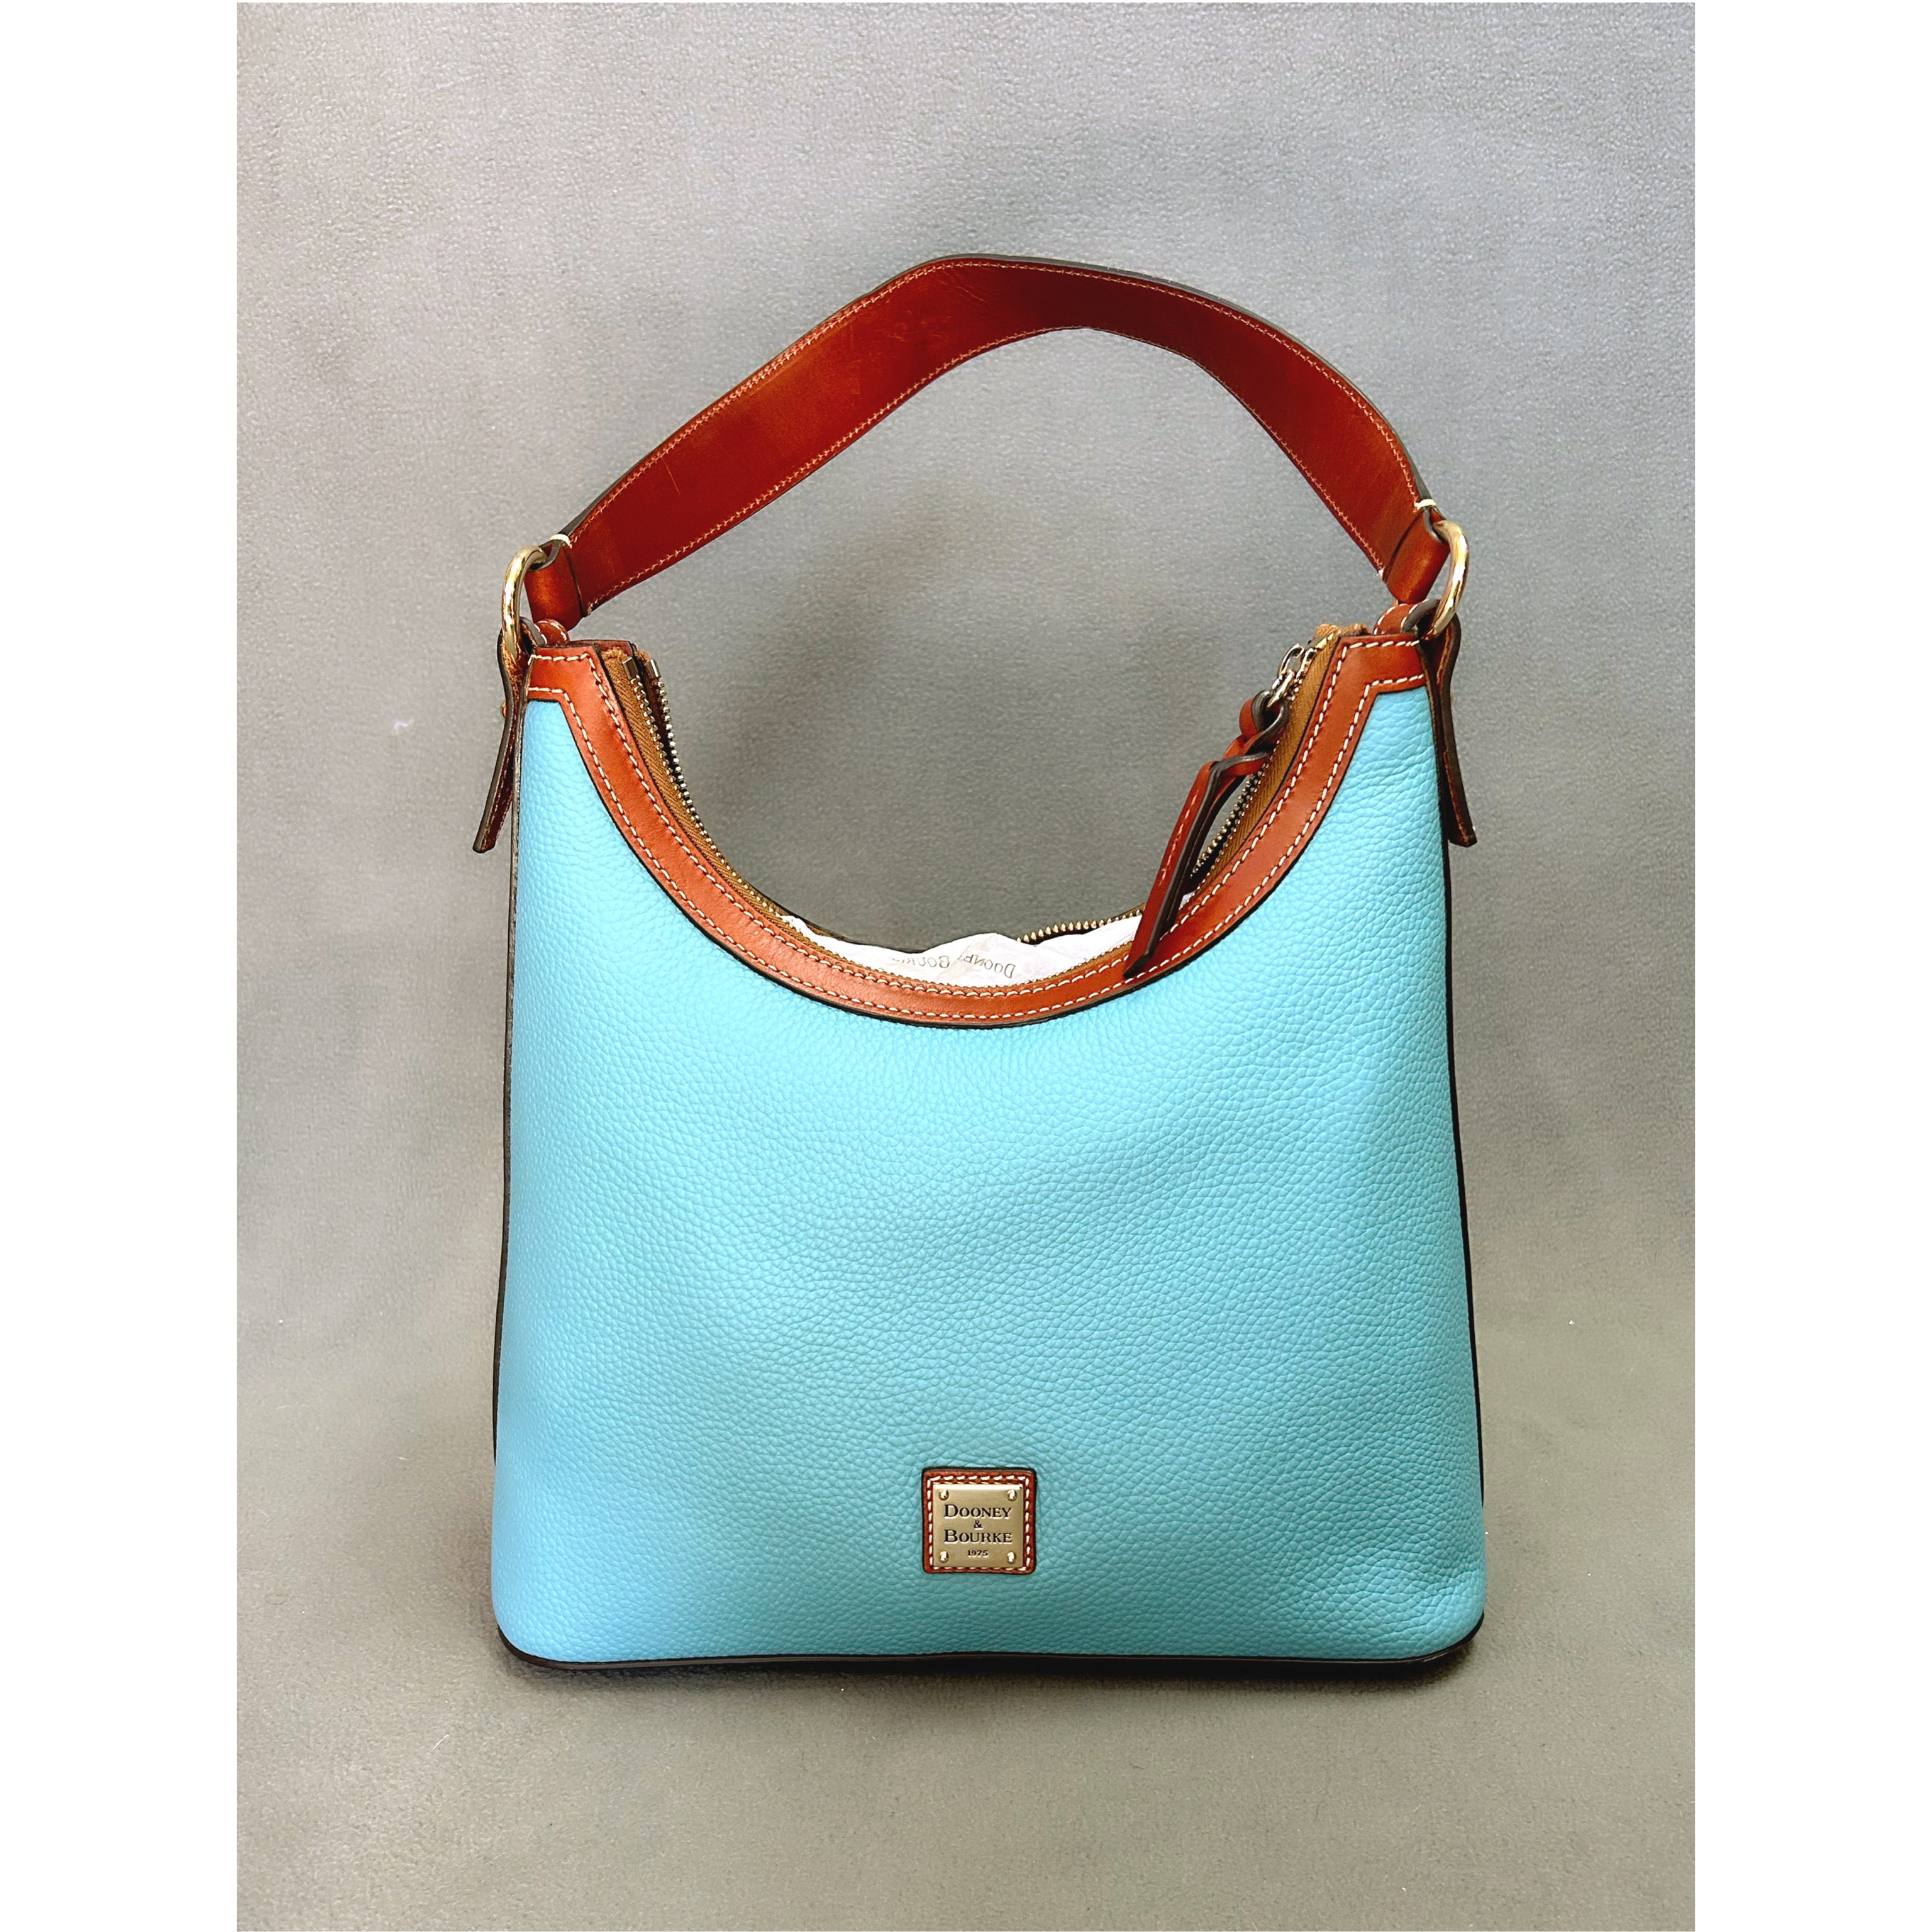 Dooney & Bourke turquoise bag, NEW w/TAGS!